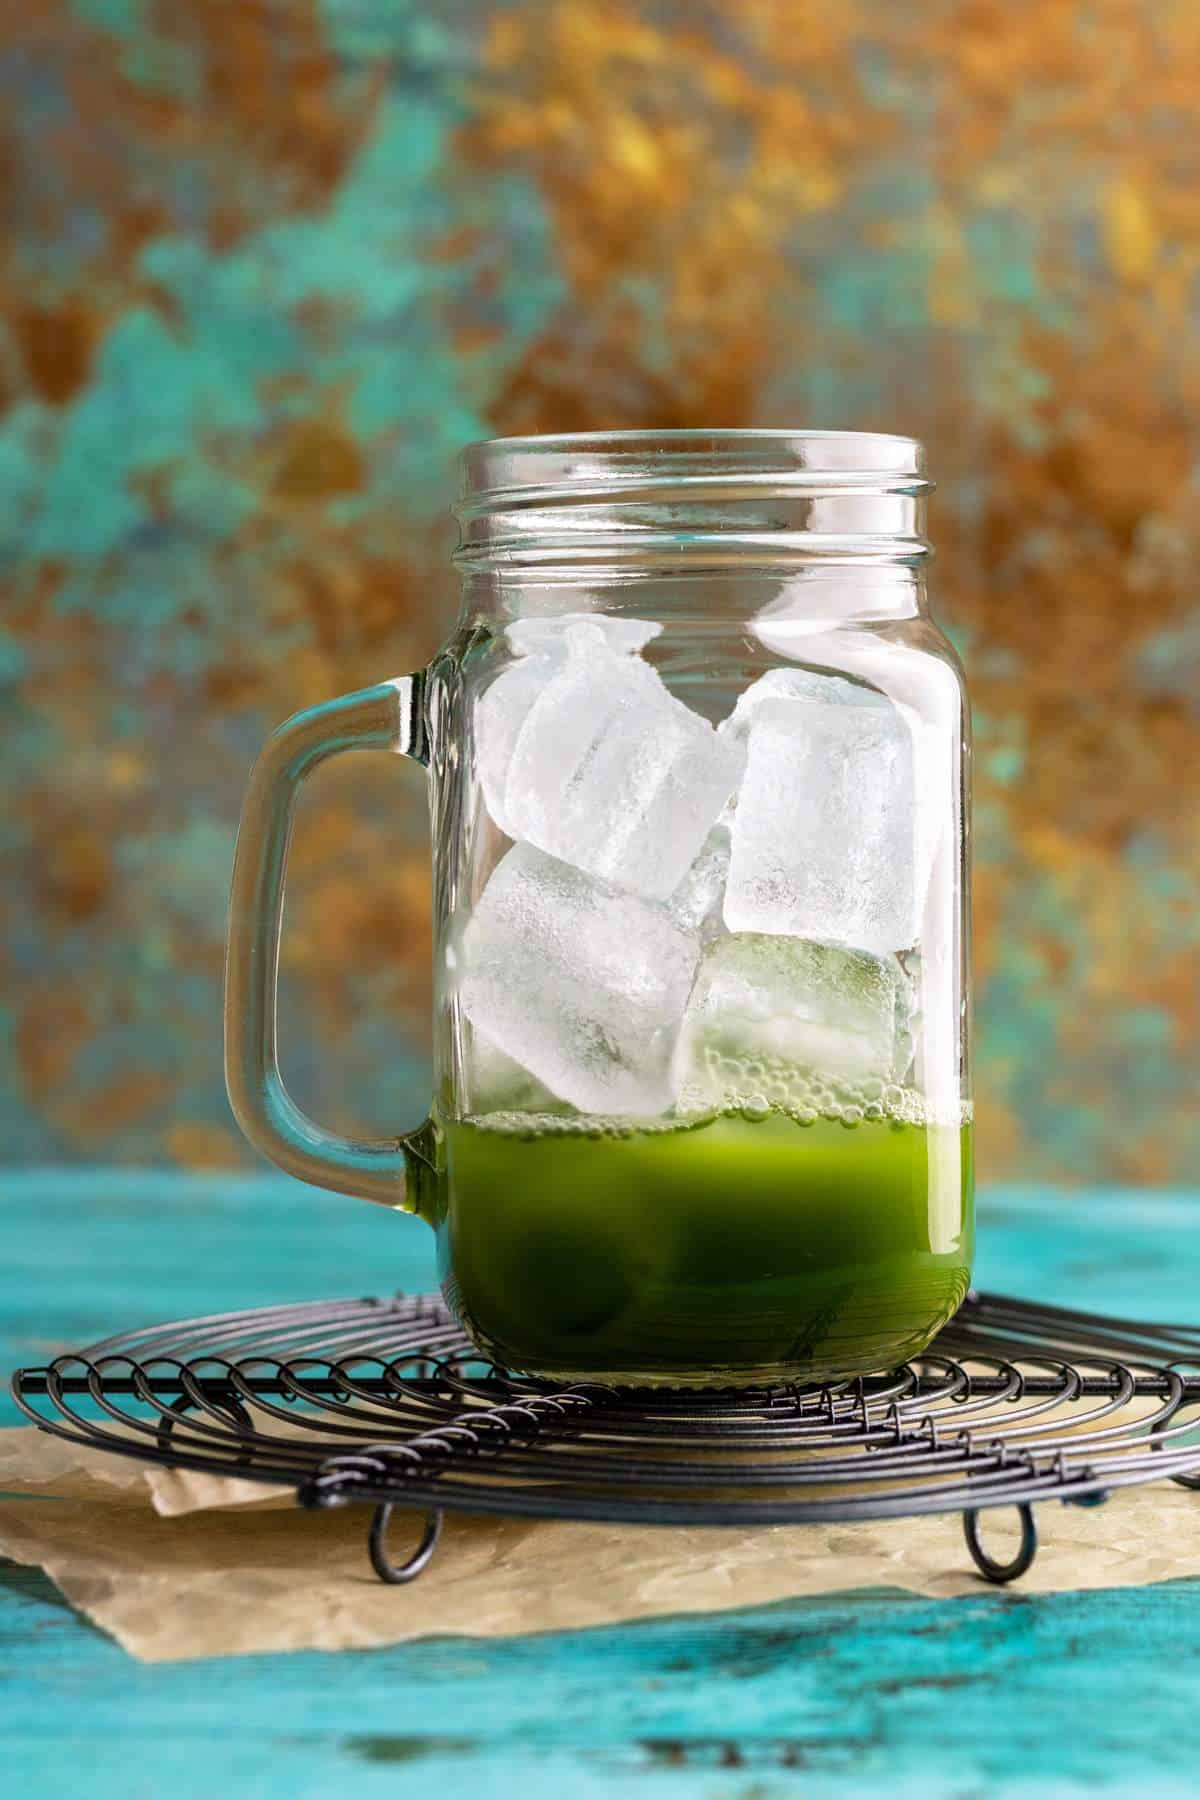 Ice cubes in a jar with matcha.